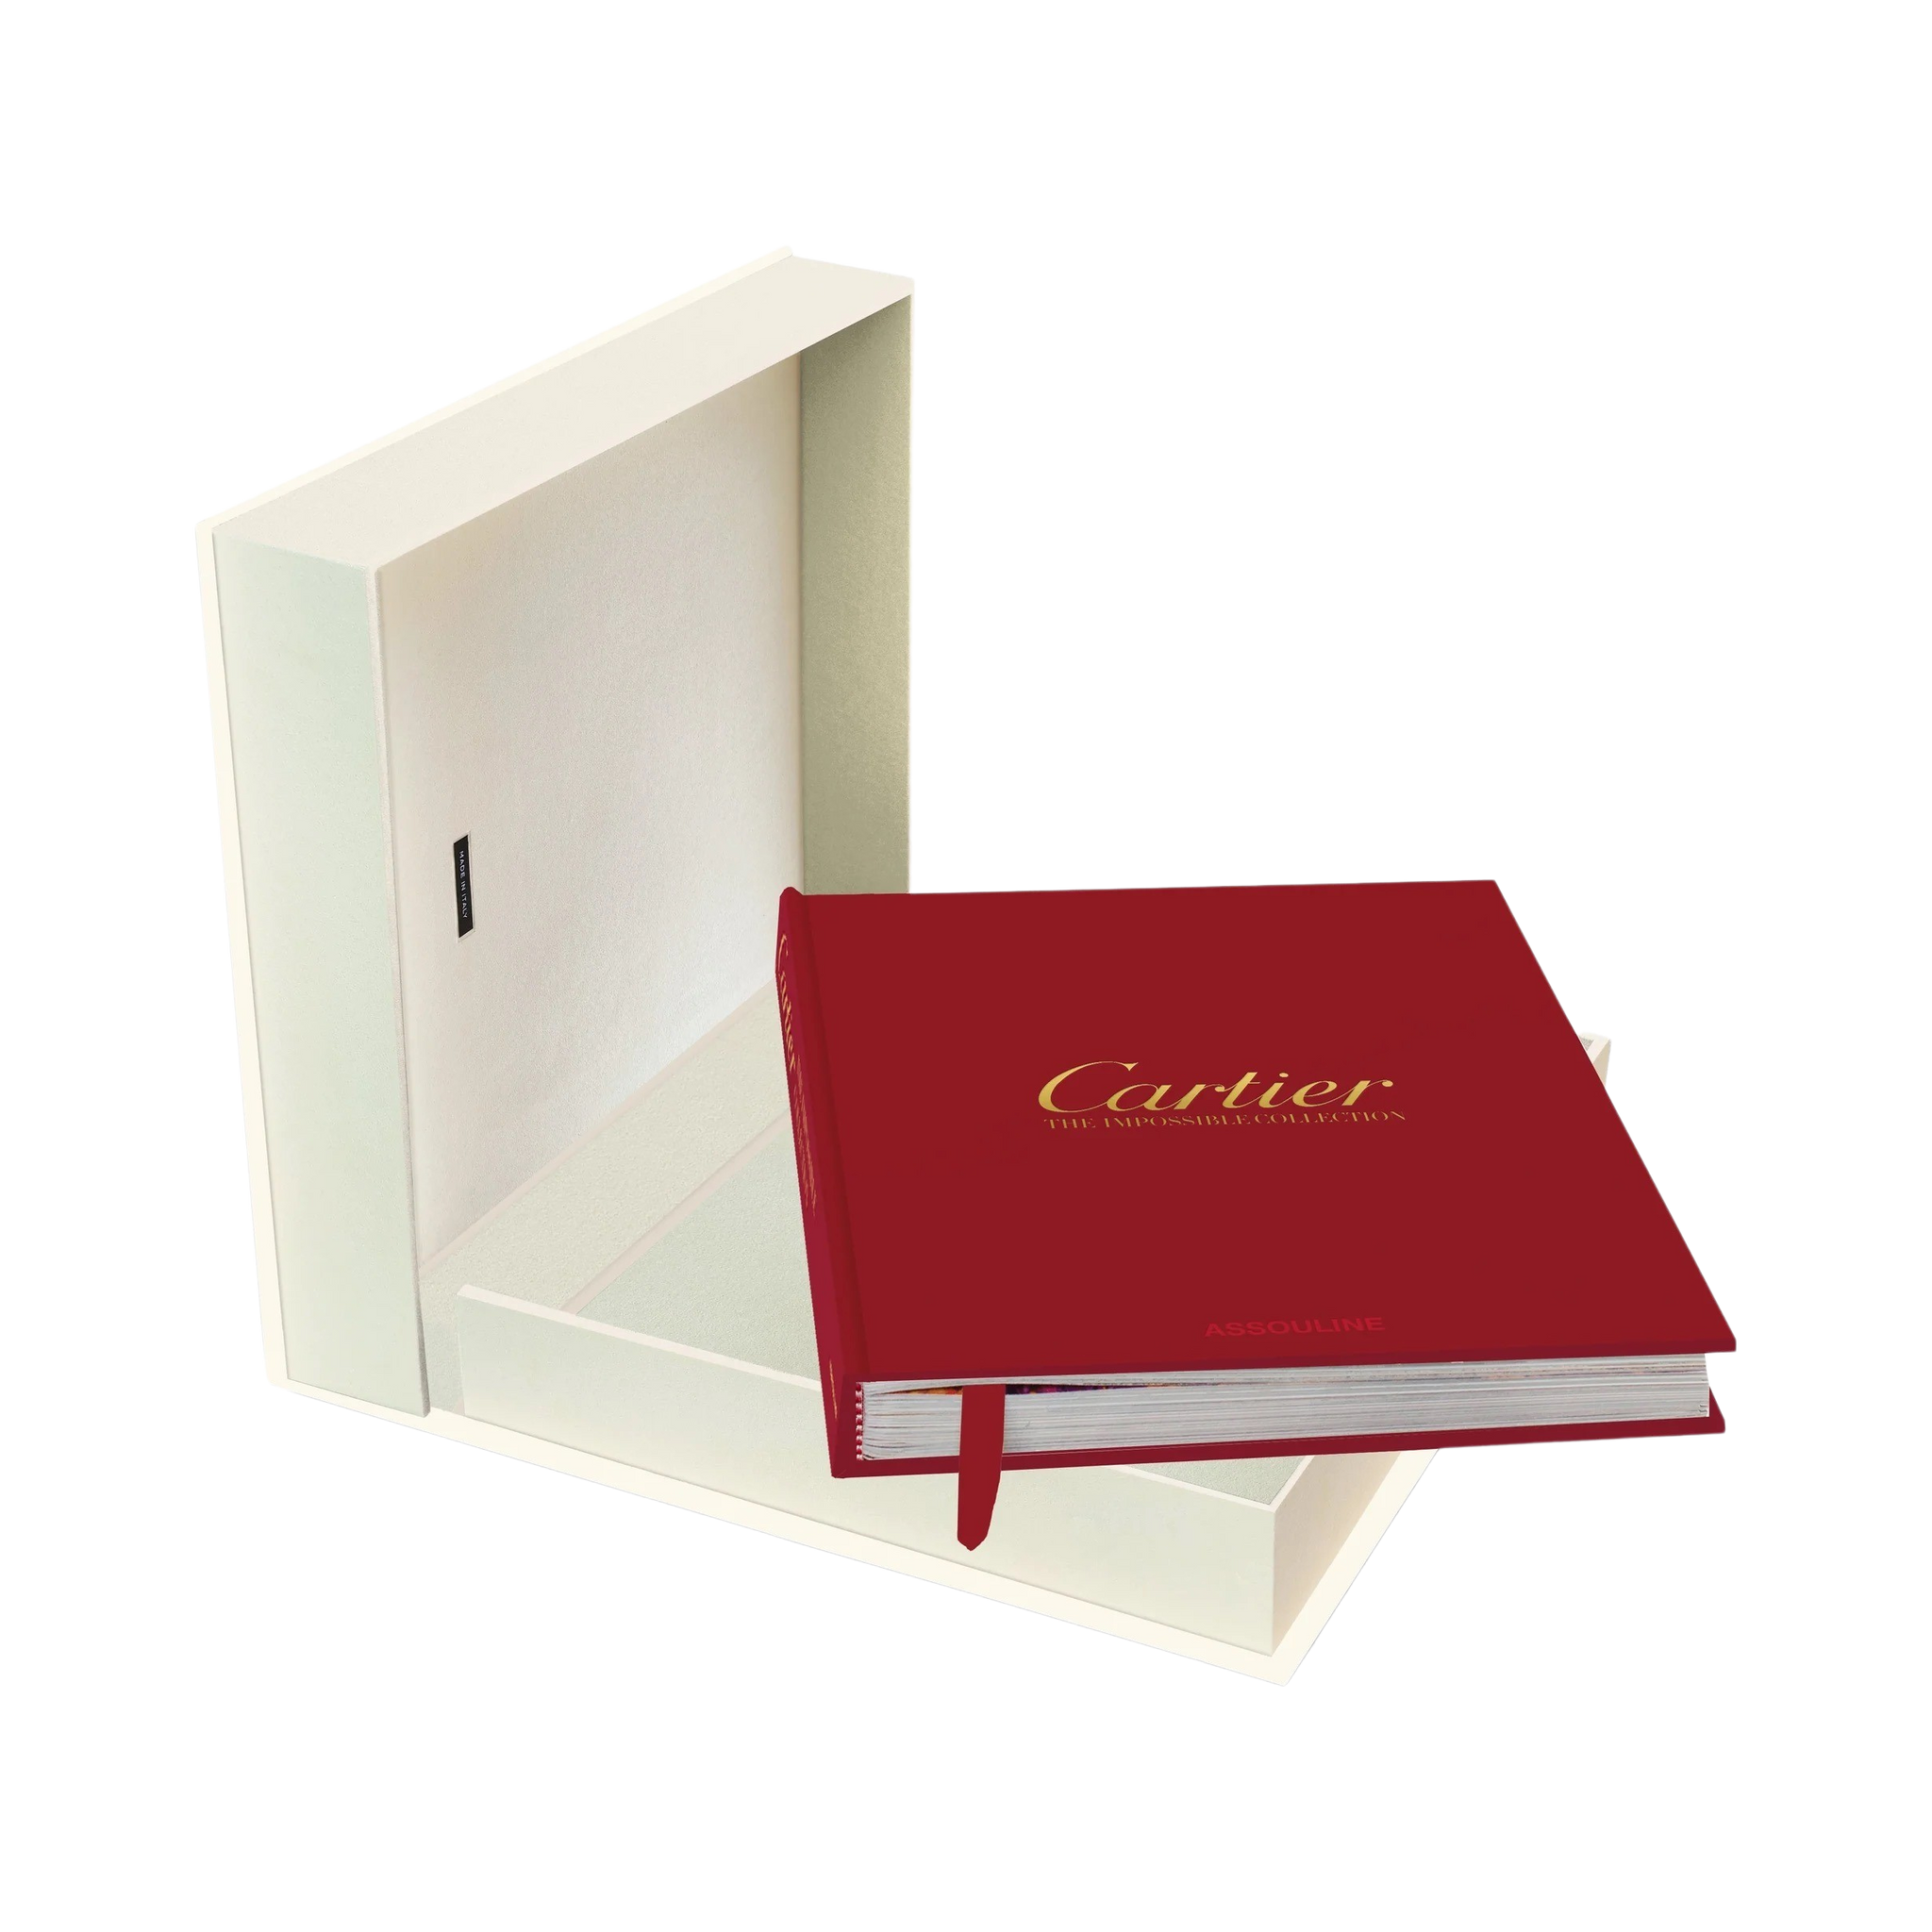 90469 Assouline Cartier: The Impossible Collection Livro